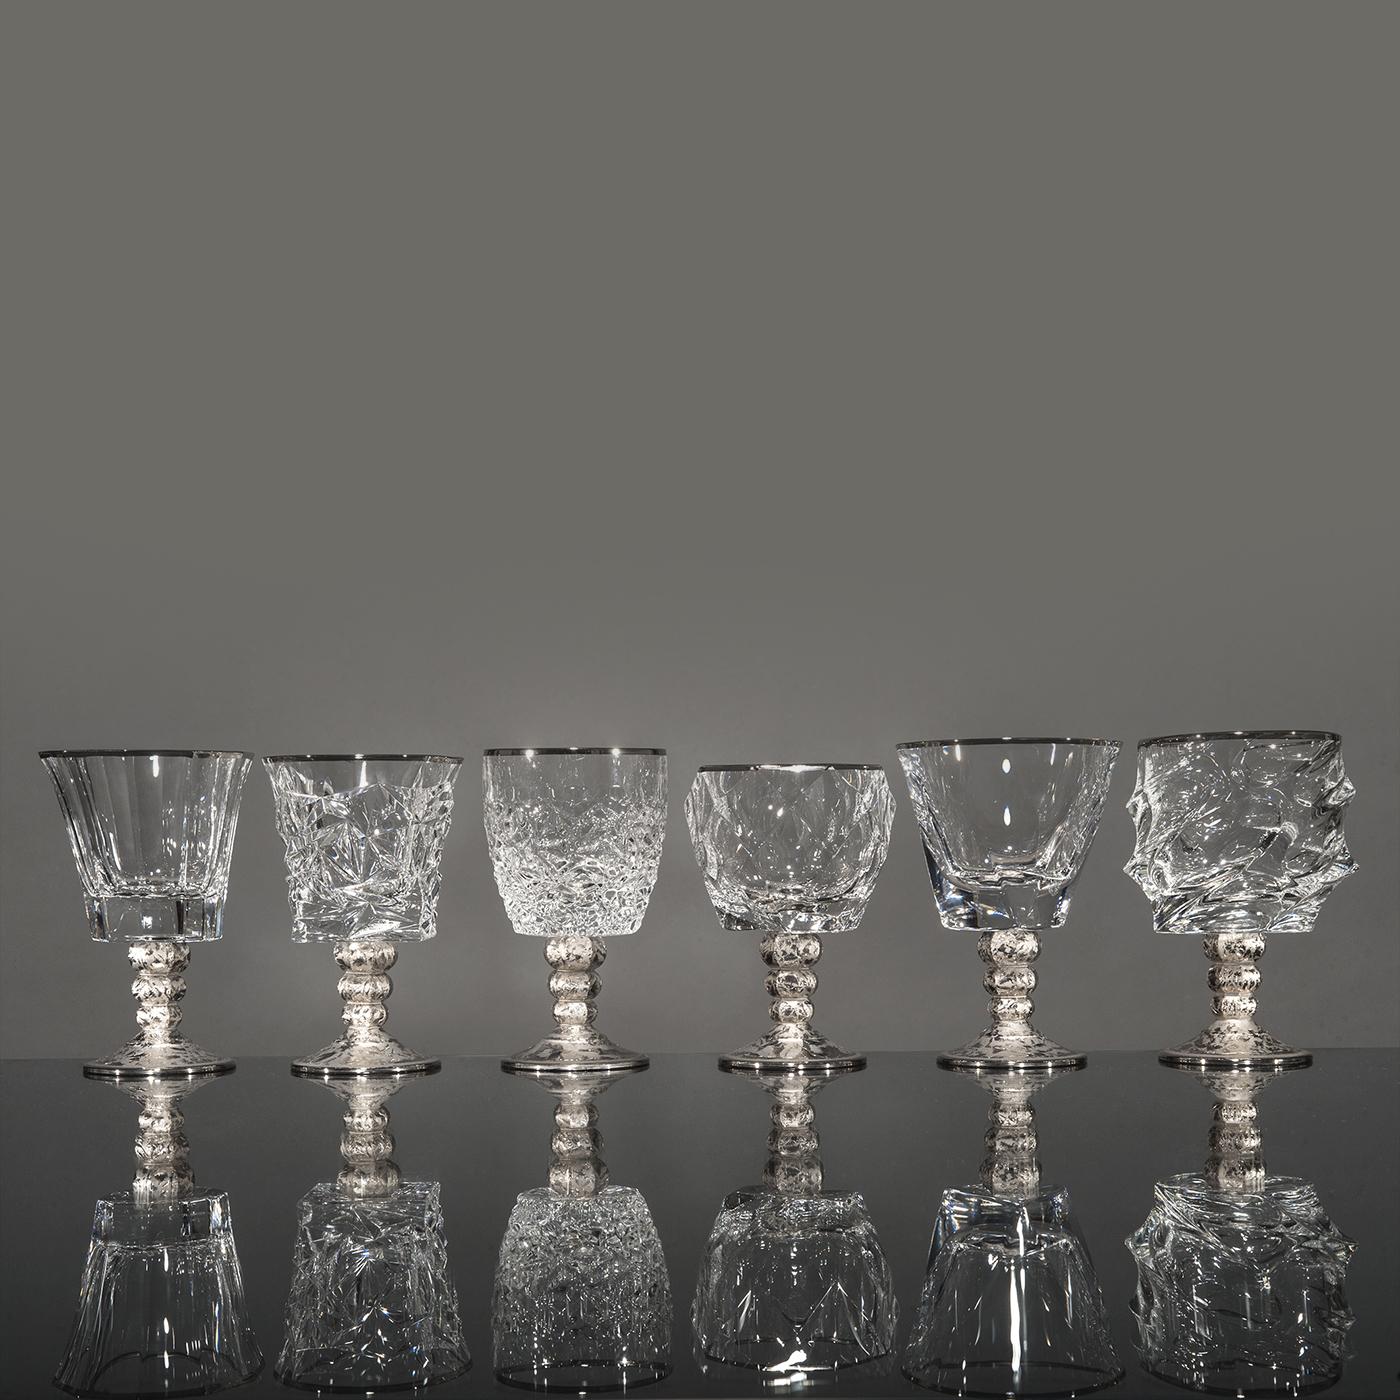 This set of six chalices is part of the Capriccio collection and can be combined with the other pieces from the same series to create a striking effect. Each piece of this set features its own shape with unique textures and abstract decorations